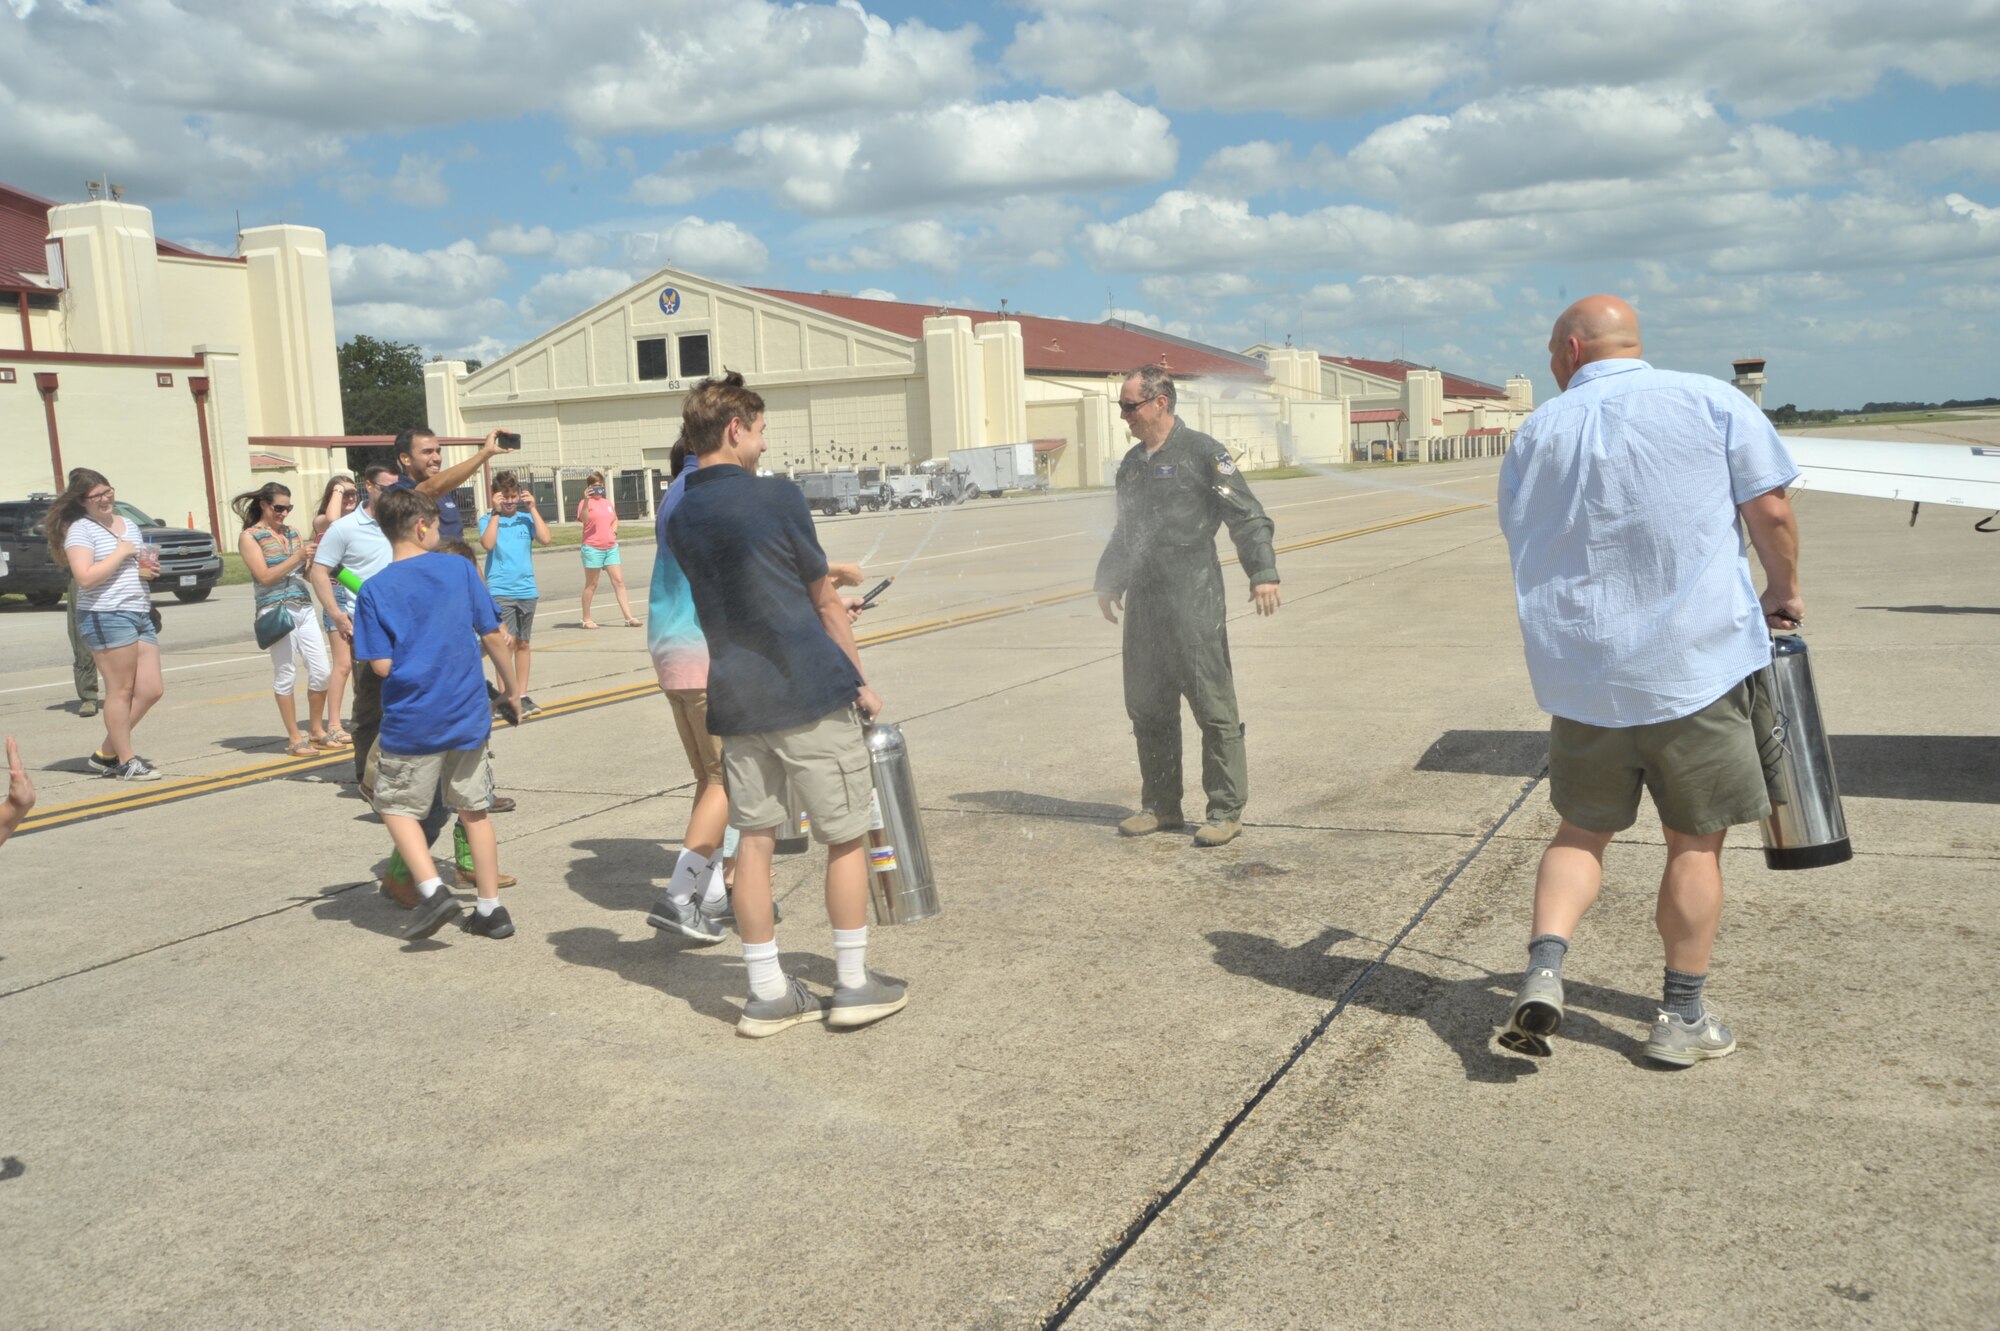 Lt. Col. Timothy Chapman, former 340th Flying Training Group Reserve Undergraduate Flying Training Program manager, takes a dousing from his brother and three of his sons following the colonel's June 18 final flight in the T-6 Texan at Joint Base San Antonio-Randolph, Texas. The fini flight and spray-down are traditional for retiring aircrew members. (U.S. Air Force photo by Debbie Gildea)